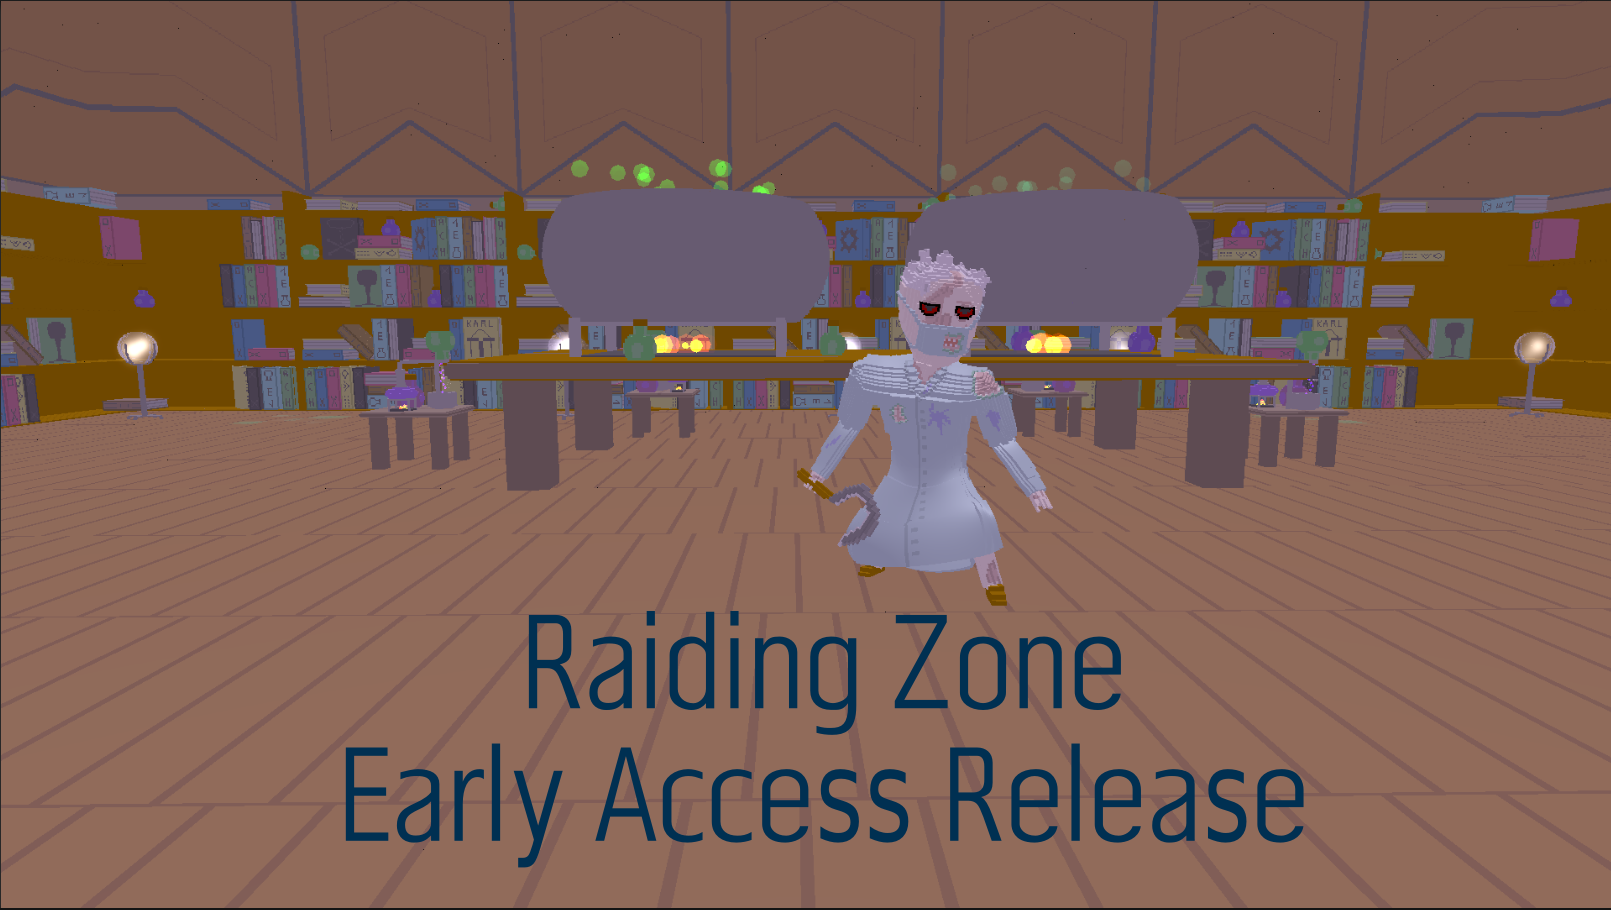 Raiding Zone: Early Access Release